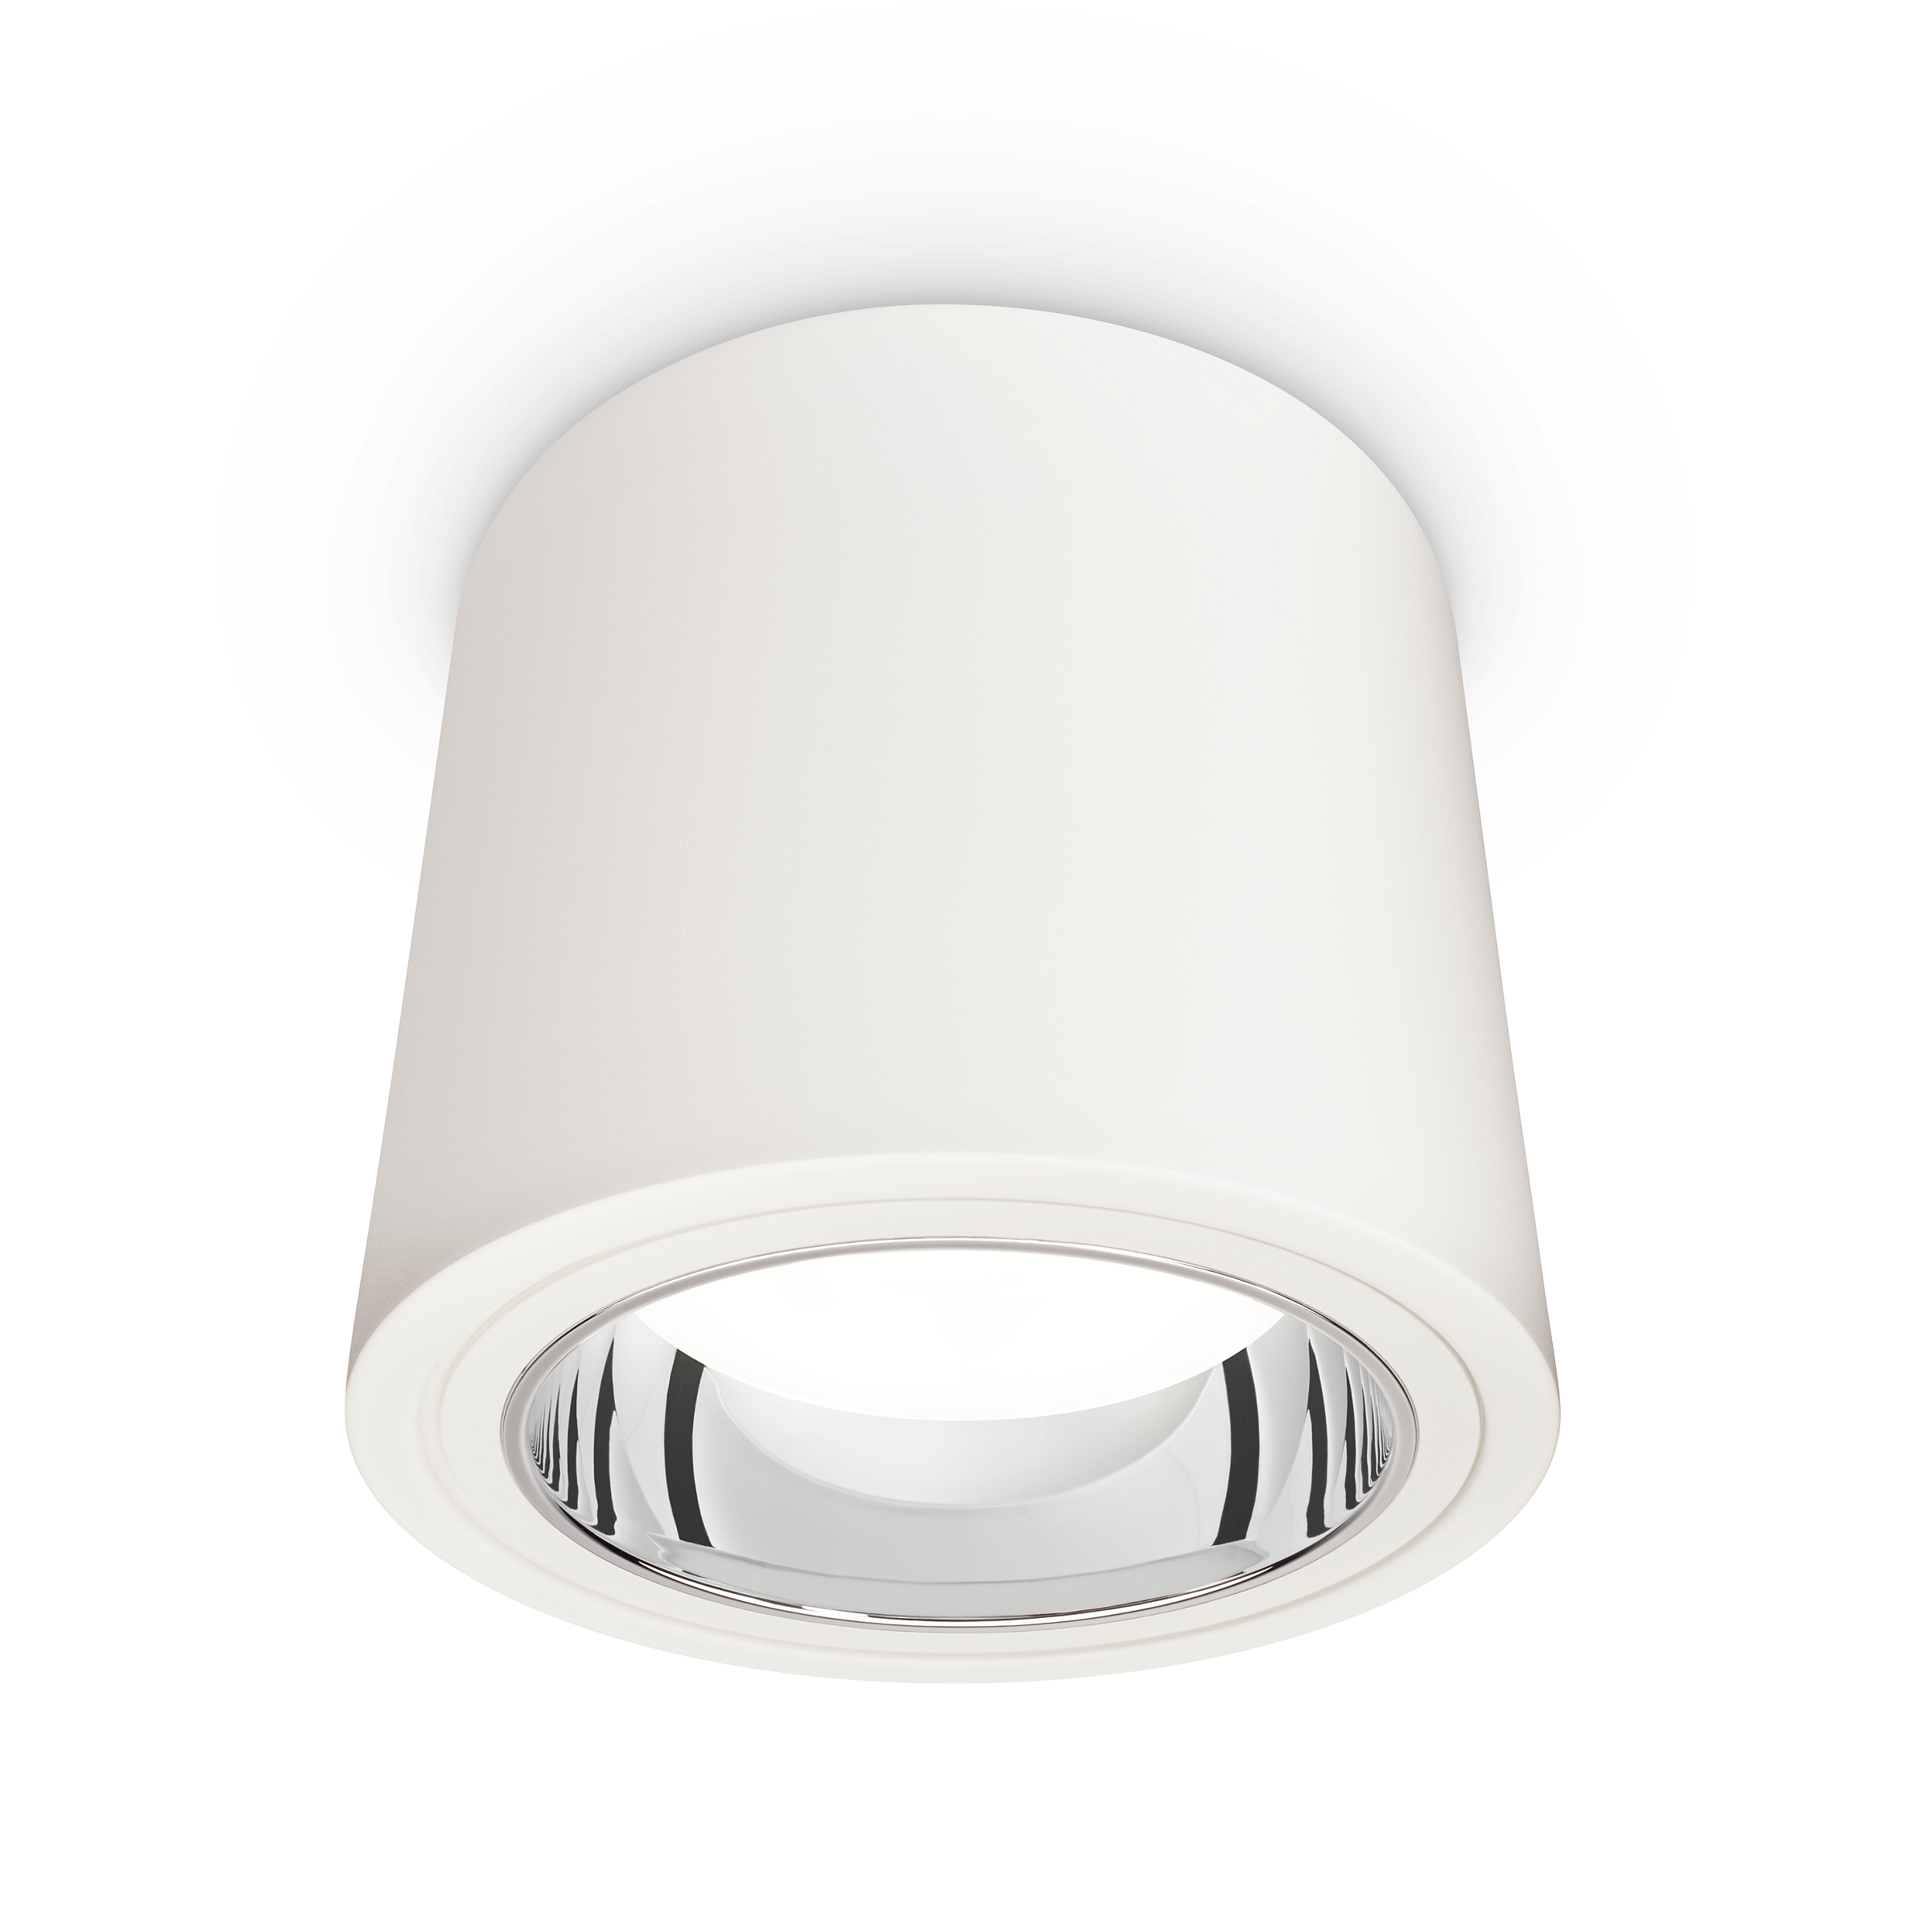 LuxSpace Compact LED gen2 Anbaudownlight